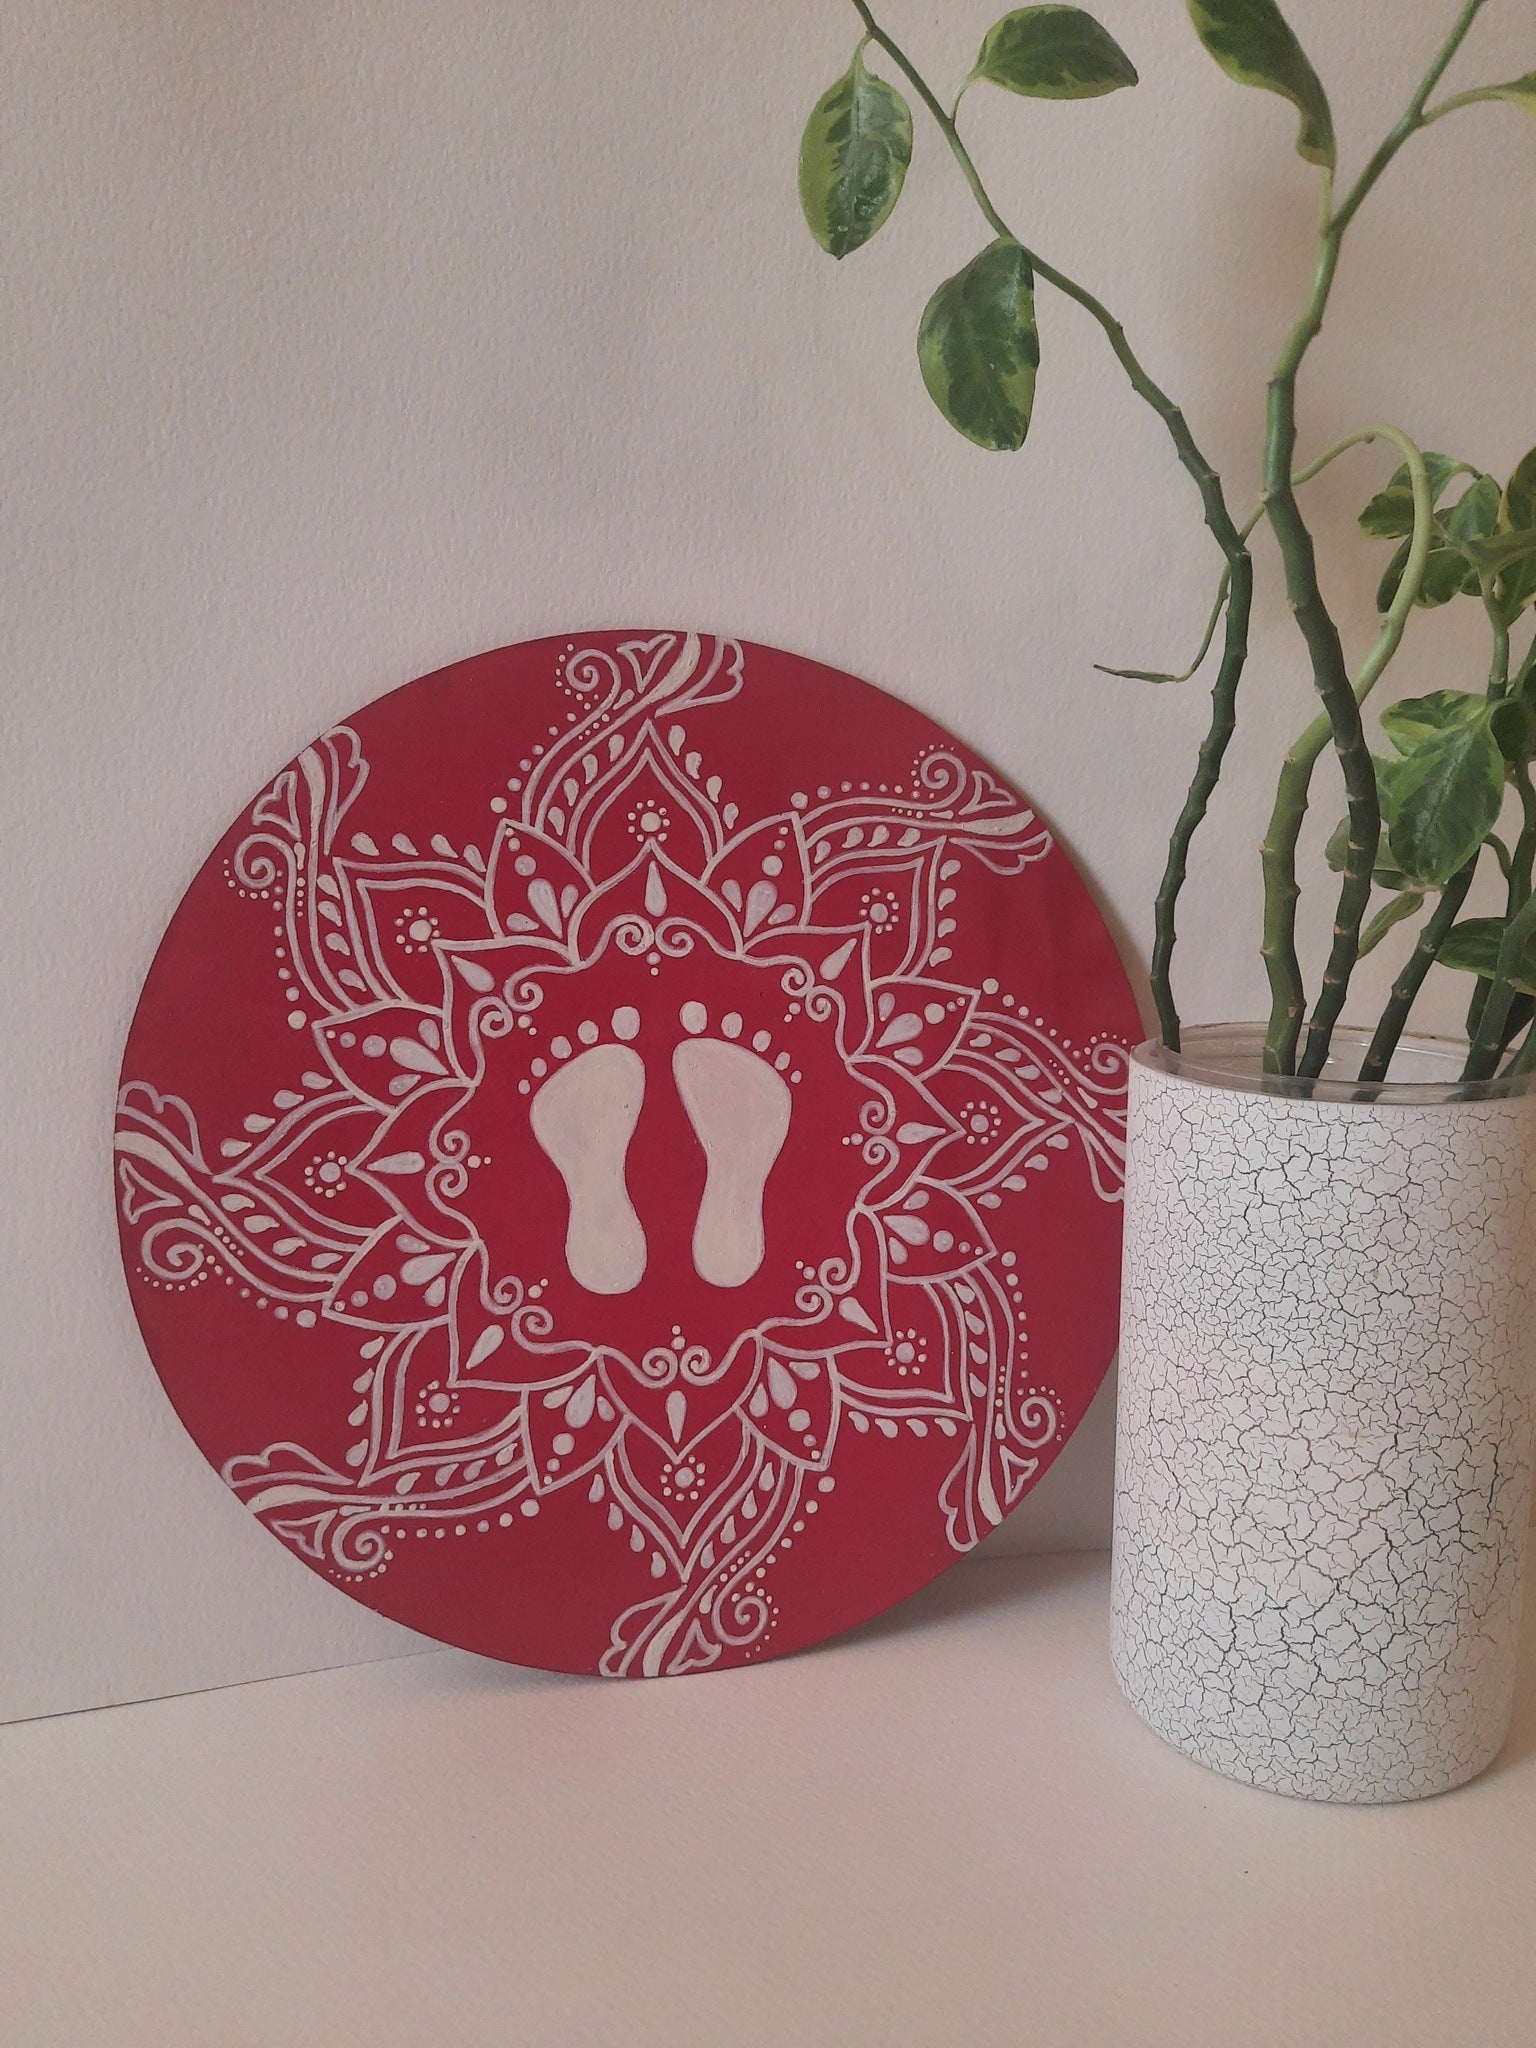 Wall plate on 10" round mdf board with traditional alpona design